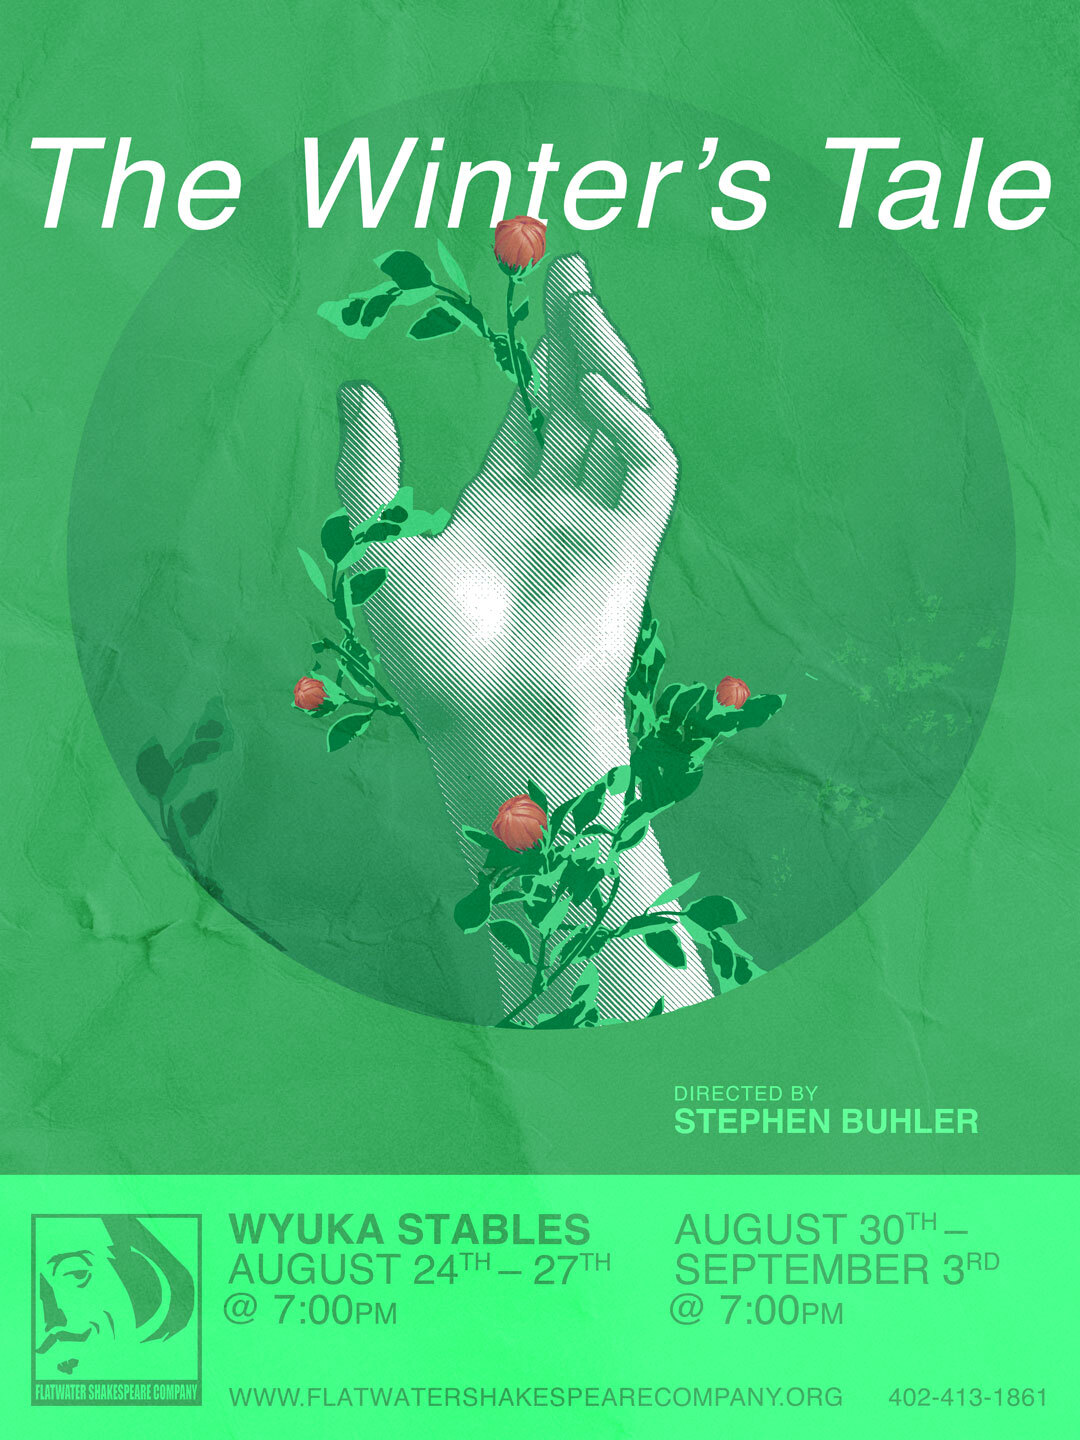 9/1 ADU - ADULT: Friday. September 1, 2023 | 7:00 p.m. - 10:00 p.m. CST | Wyuka Stables (The Winter's Tale)